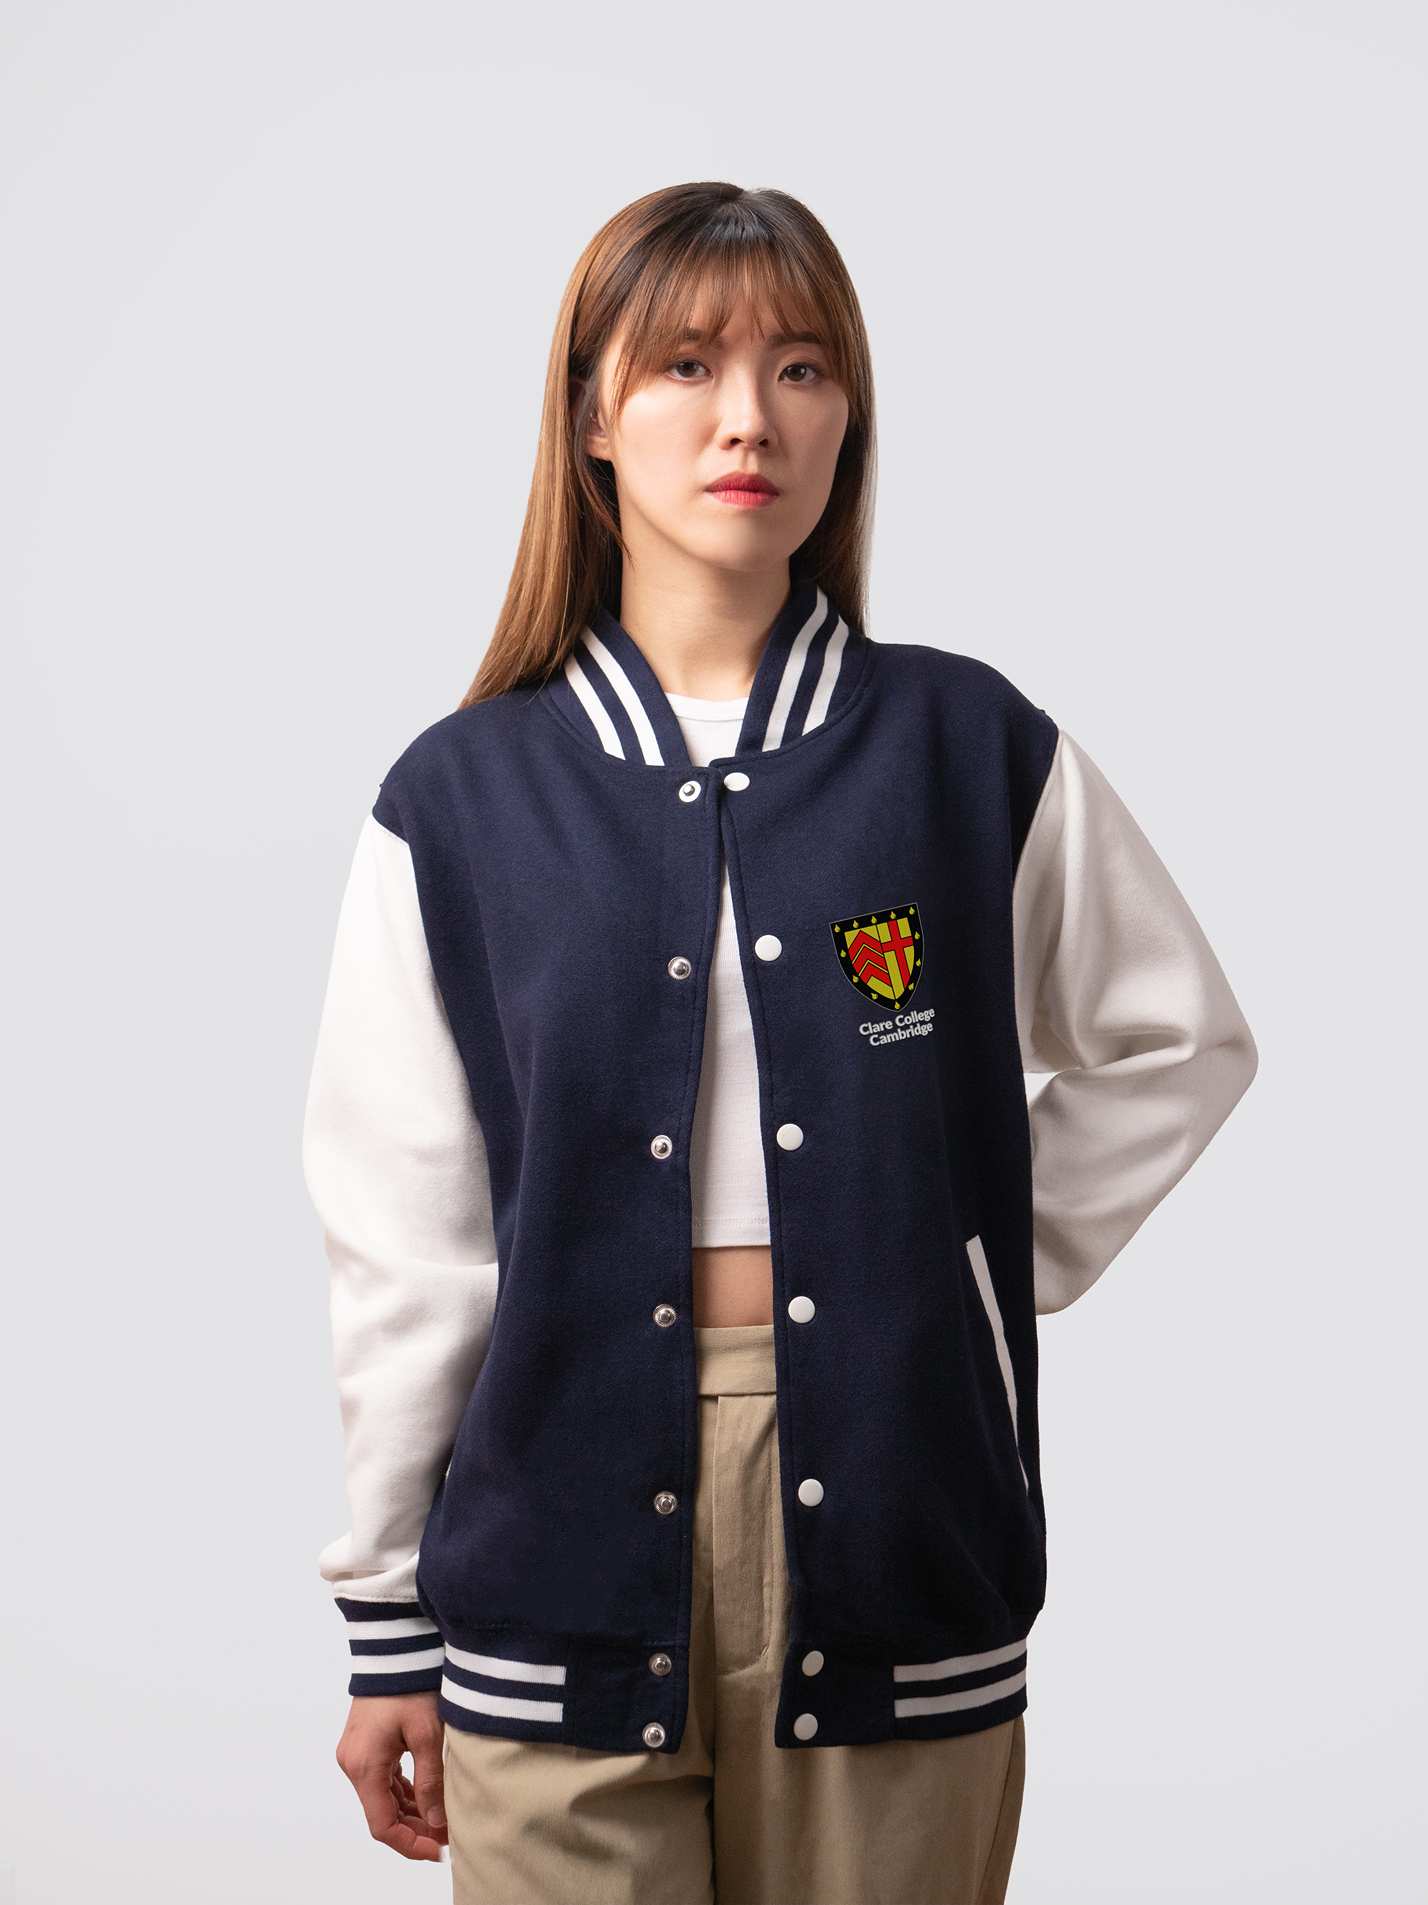 Retro style varsity jacket, with embroidered Clare crest